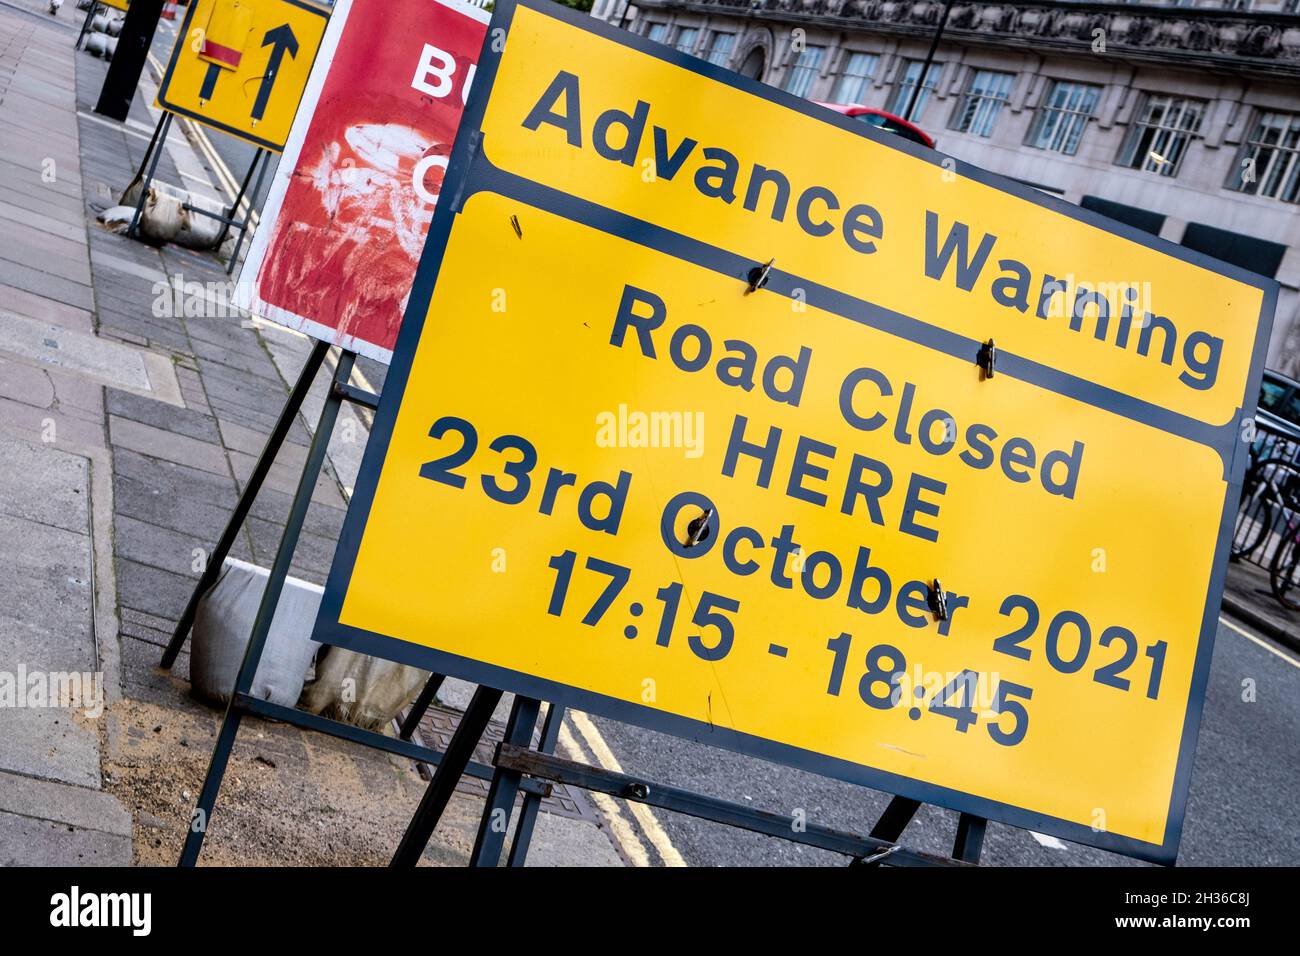 Advance Warning Of Road Closure On Waterloo Bridge Central London England UK With No People Stock Photo